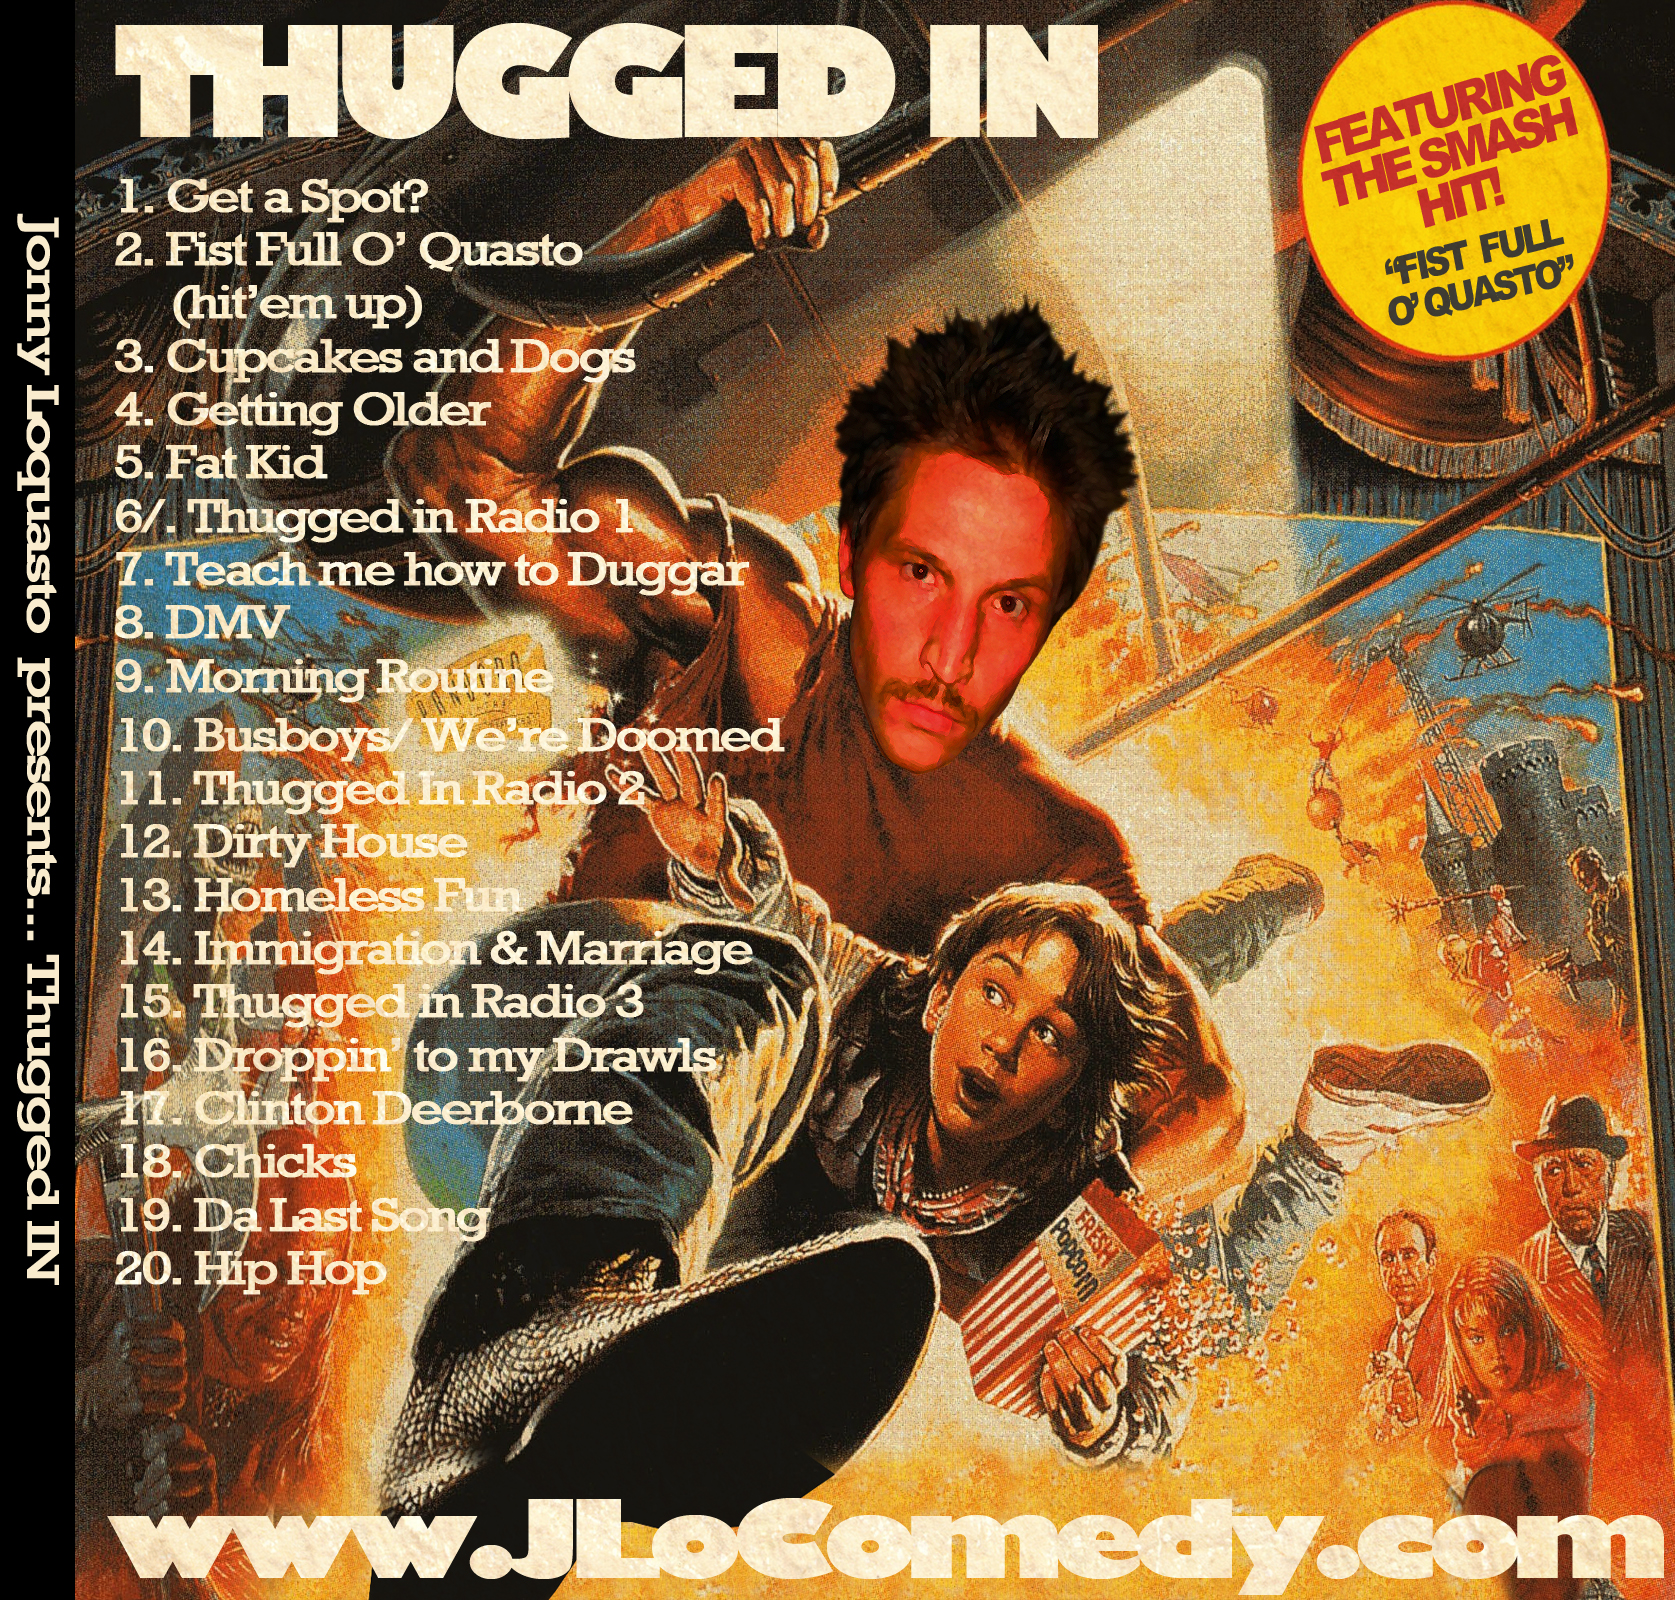 Back cover of the comedy album 